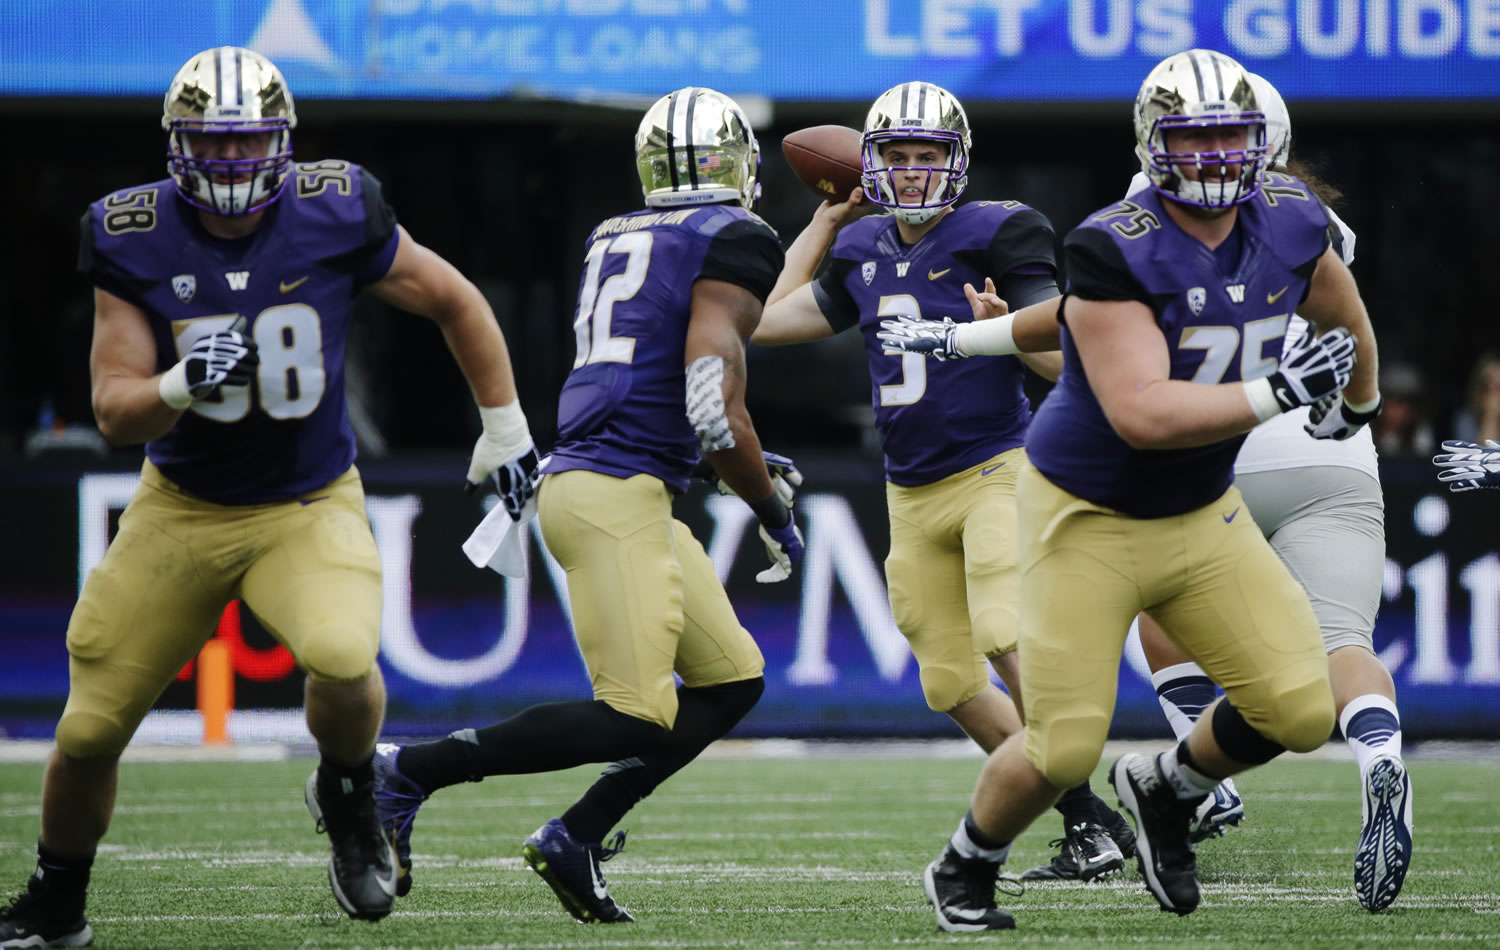 Washington quarterback Jake Browning (3) prepares to complete a pass to Dwayne Washington (12) as Jesse Sosebee, right, and Kaleb McGary, left, block against Utah State in the first half, Saturday, Sept. 19, 2015, in Seattle. (AP Photo/Ted S.